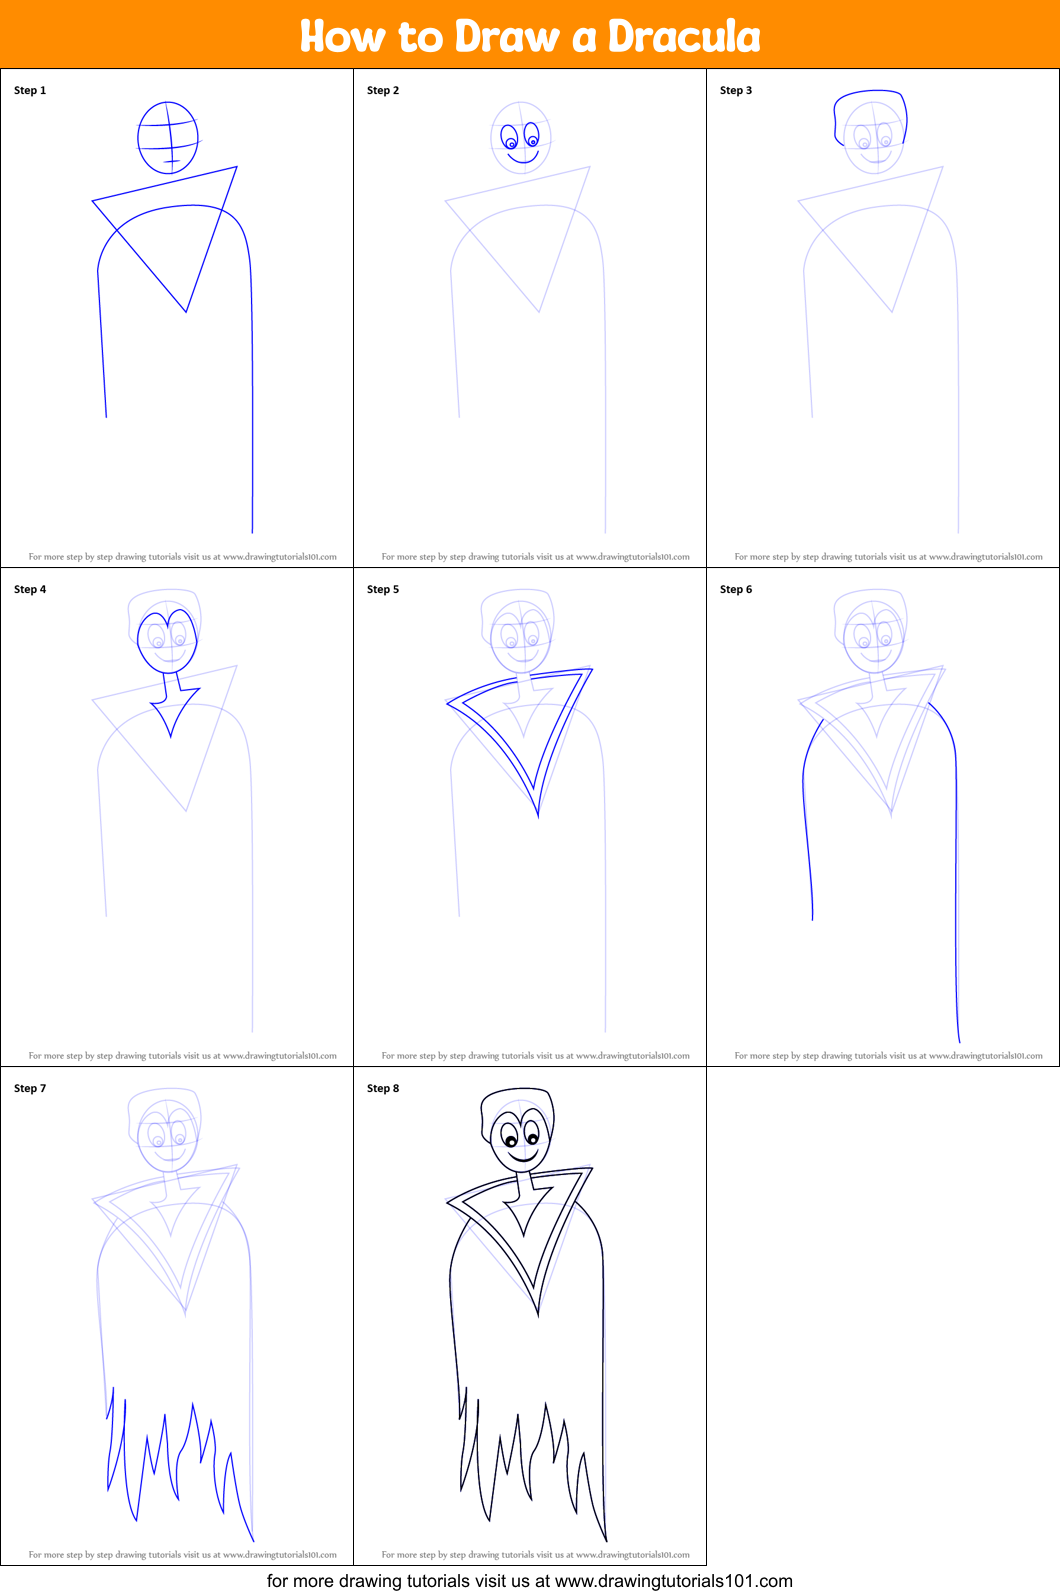 How to Draw a Dracula (Halloween) Step by Step | DrawingTutorials101.com